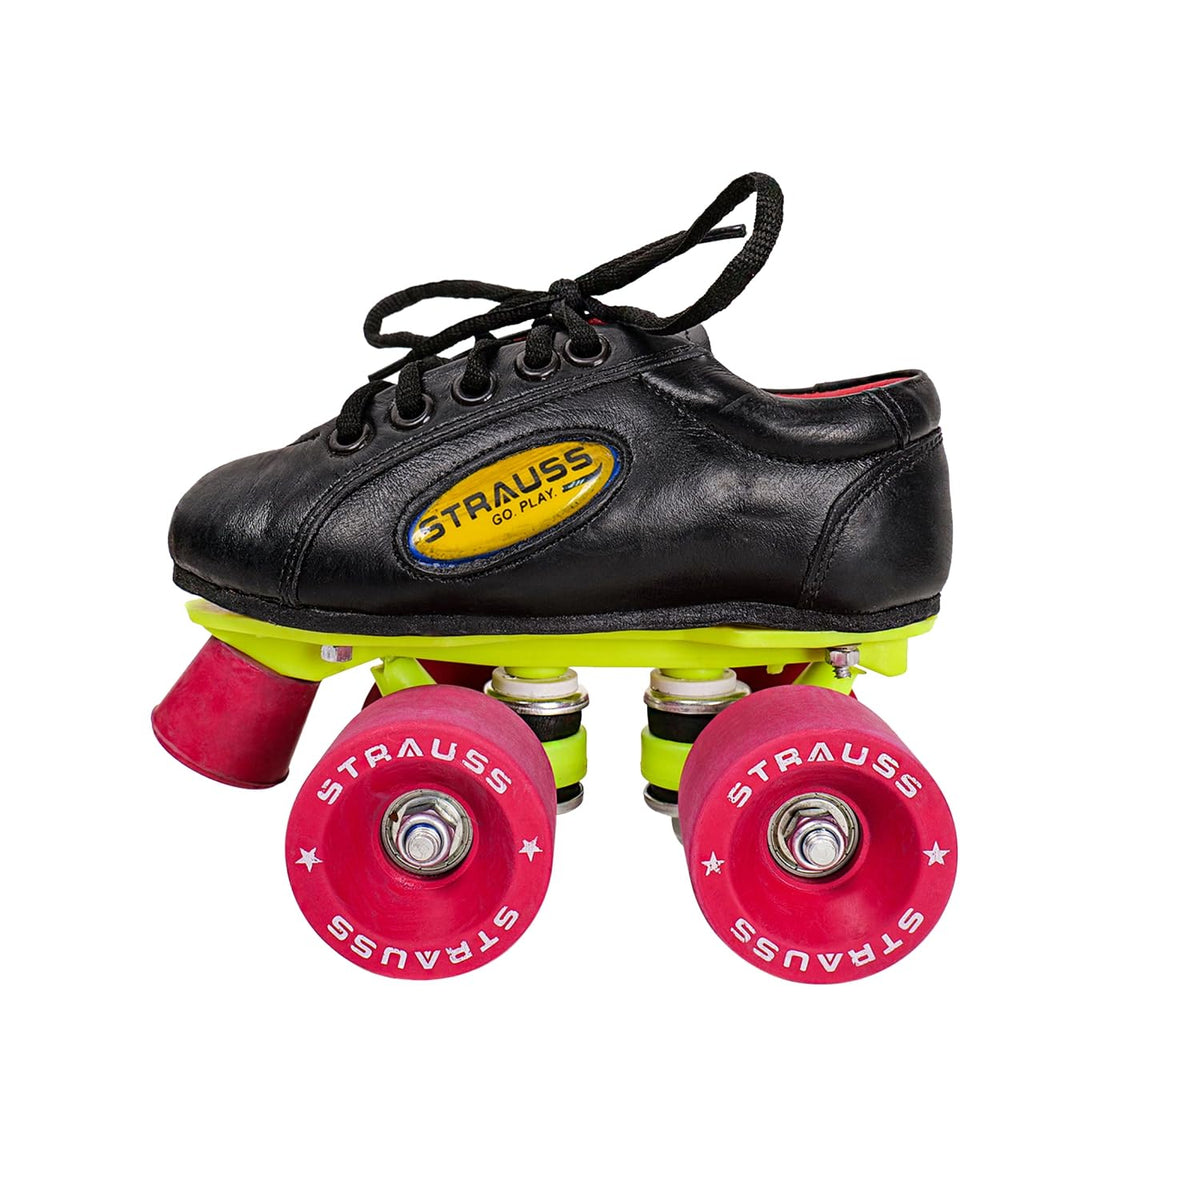 STRAUSS Gripper Skating Shoes | Fixed Body Roller Skates | Shoe Skate With Rubber Wheel |Ideal For Boys, Girls and Kids |Suitable For All Skill Level | Ideal For Kids (7-8 Years) , Size-13, (Red/Black)